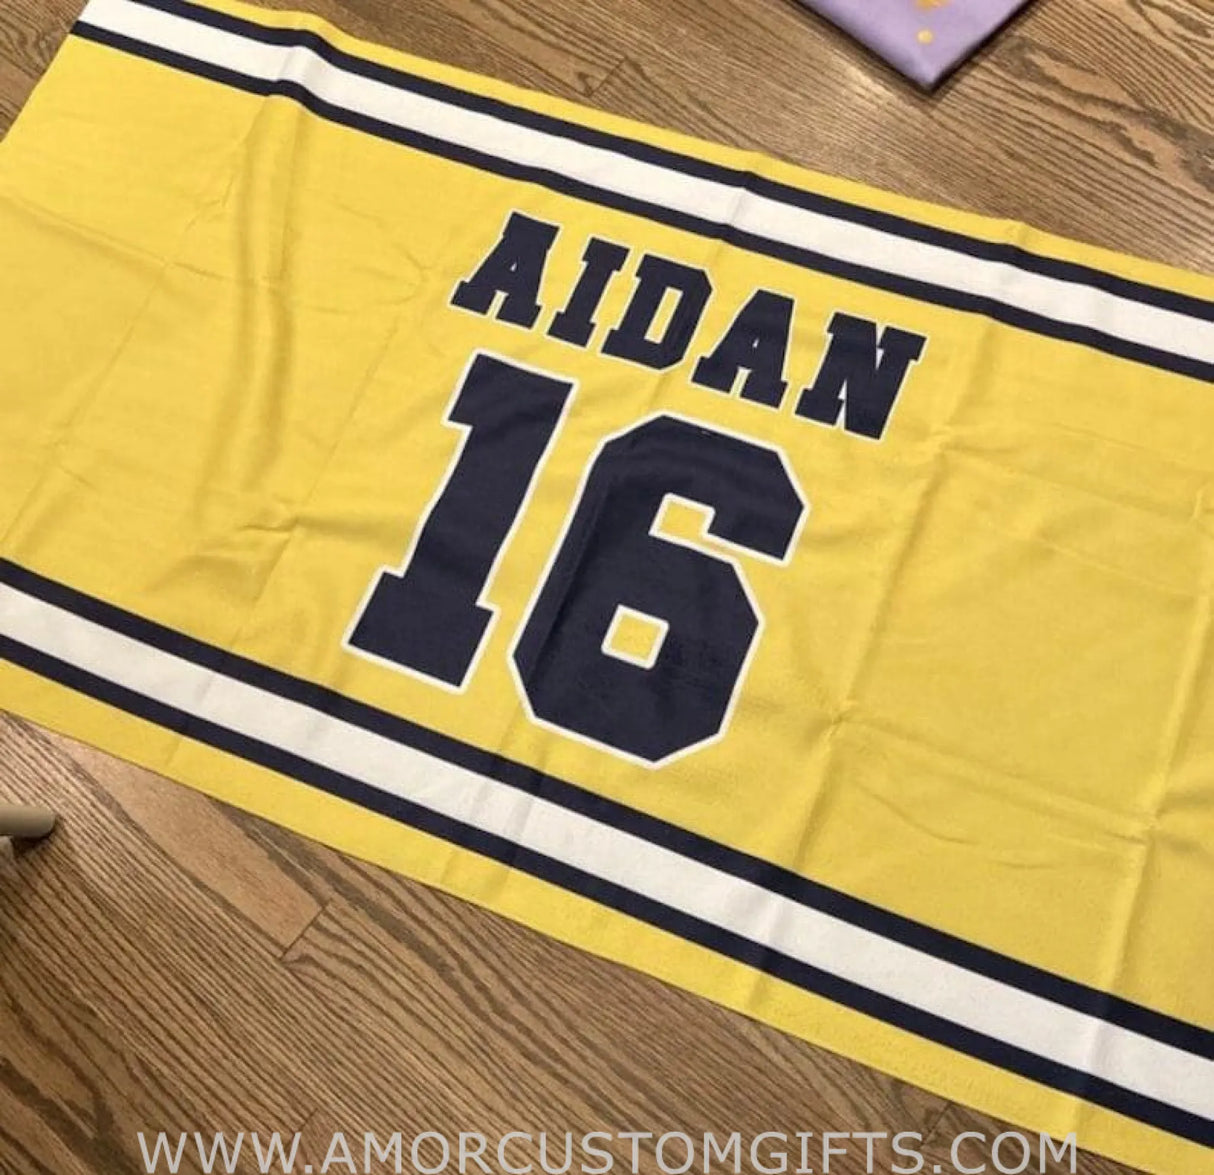 Towels Sports Personalized Beach Towel Personalized Name Bath Towel Custom Pool Towel Beach Towel With Name Outside Birthday Vacation Gift